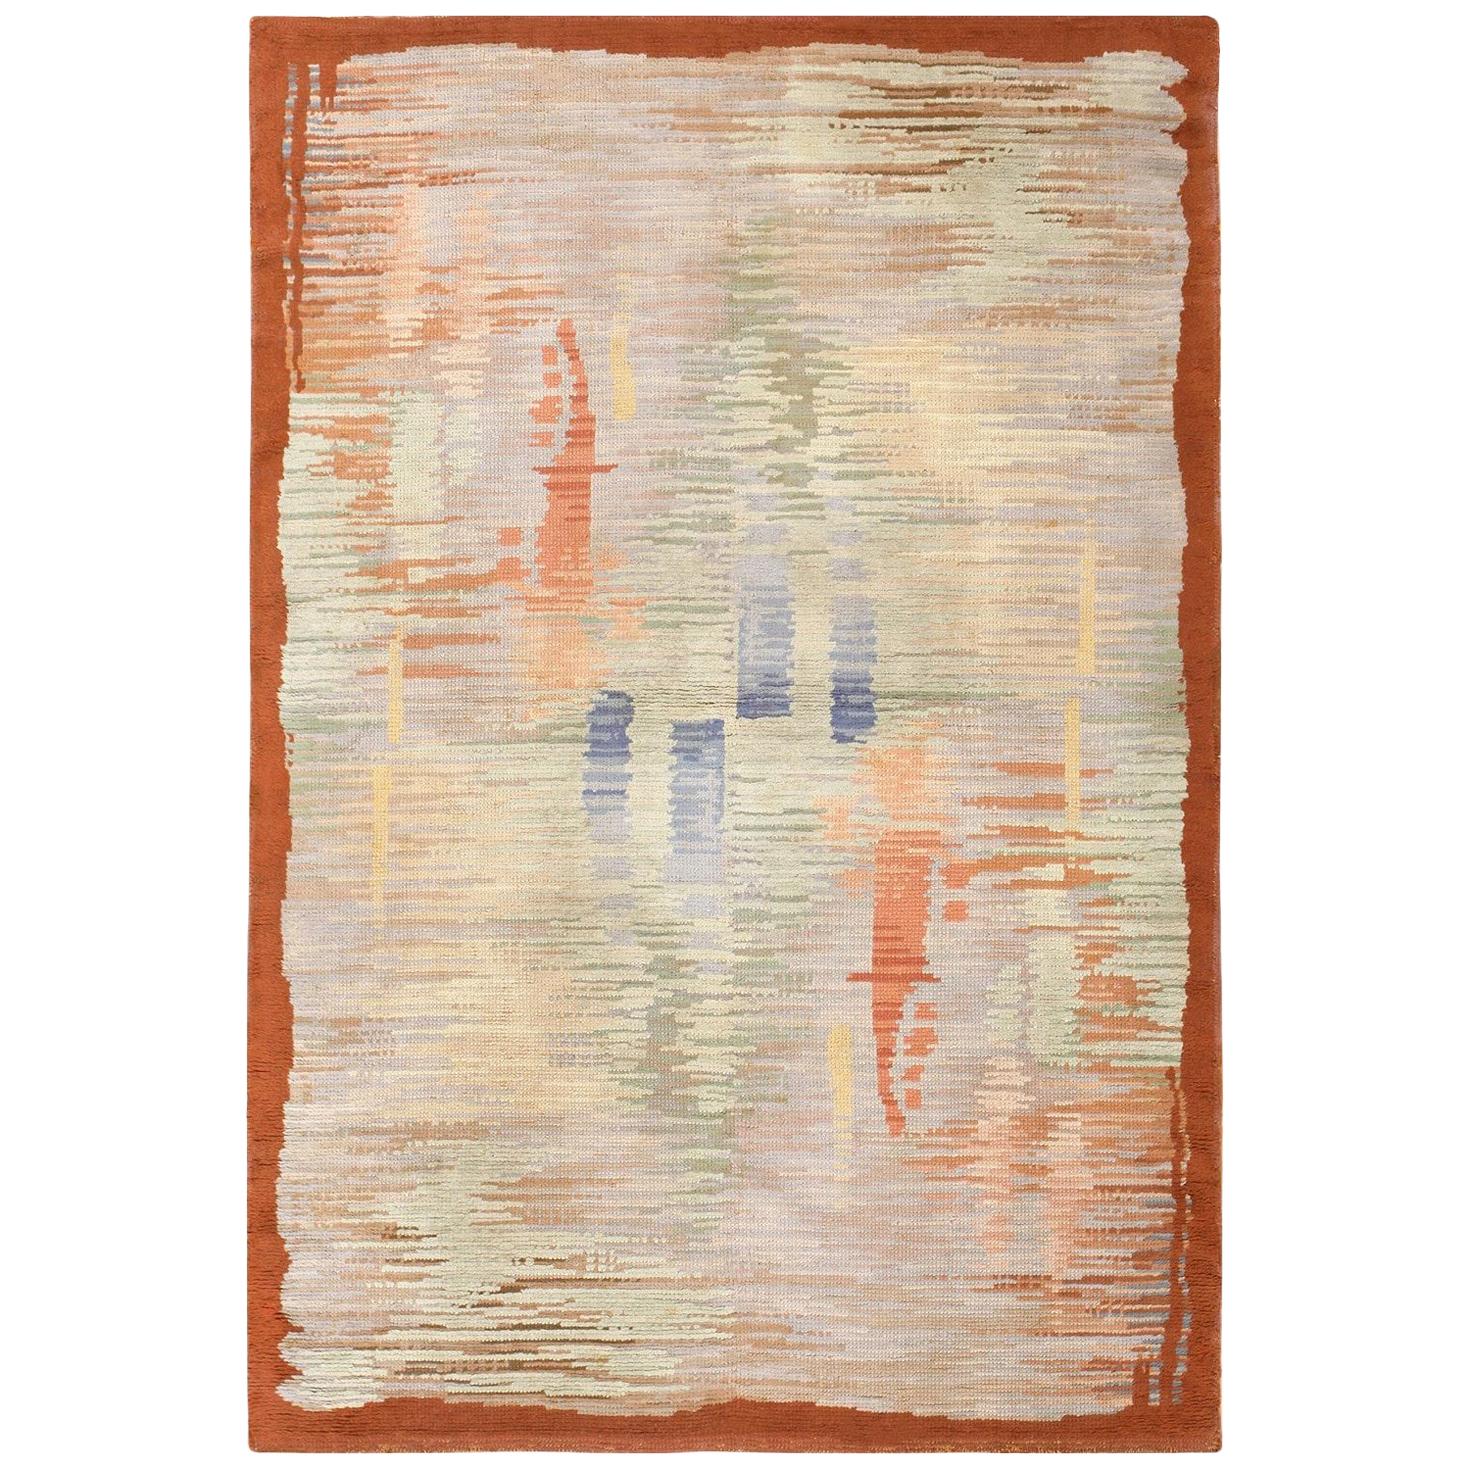 Vintage Surrealist French Art Deco Rug. Size: 5 ft 5 in x 8 ft 1 in